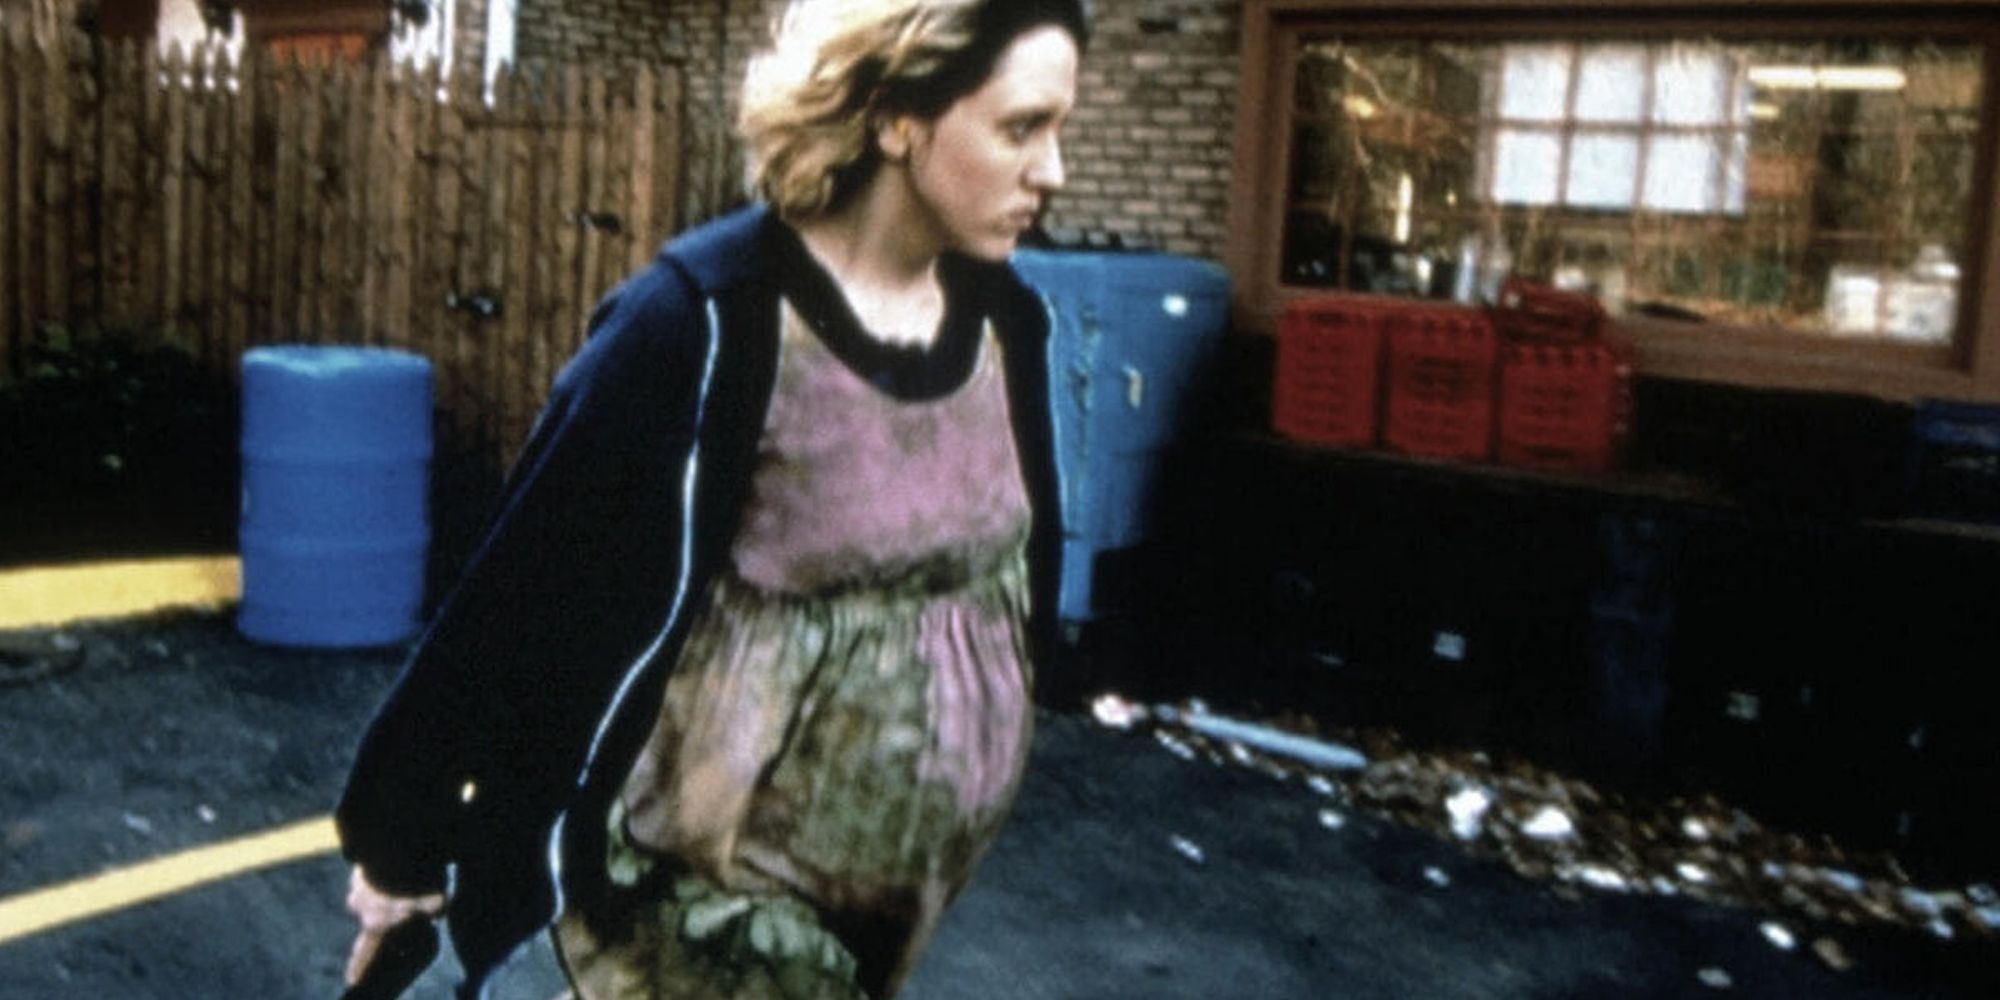 Brooke Smith as Dawn walking down a street holding a gun in the film Series 7: The Contenders.